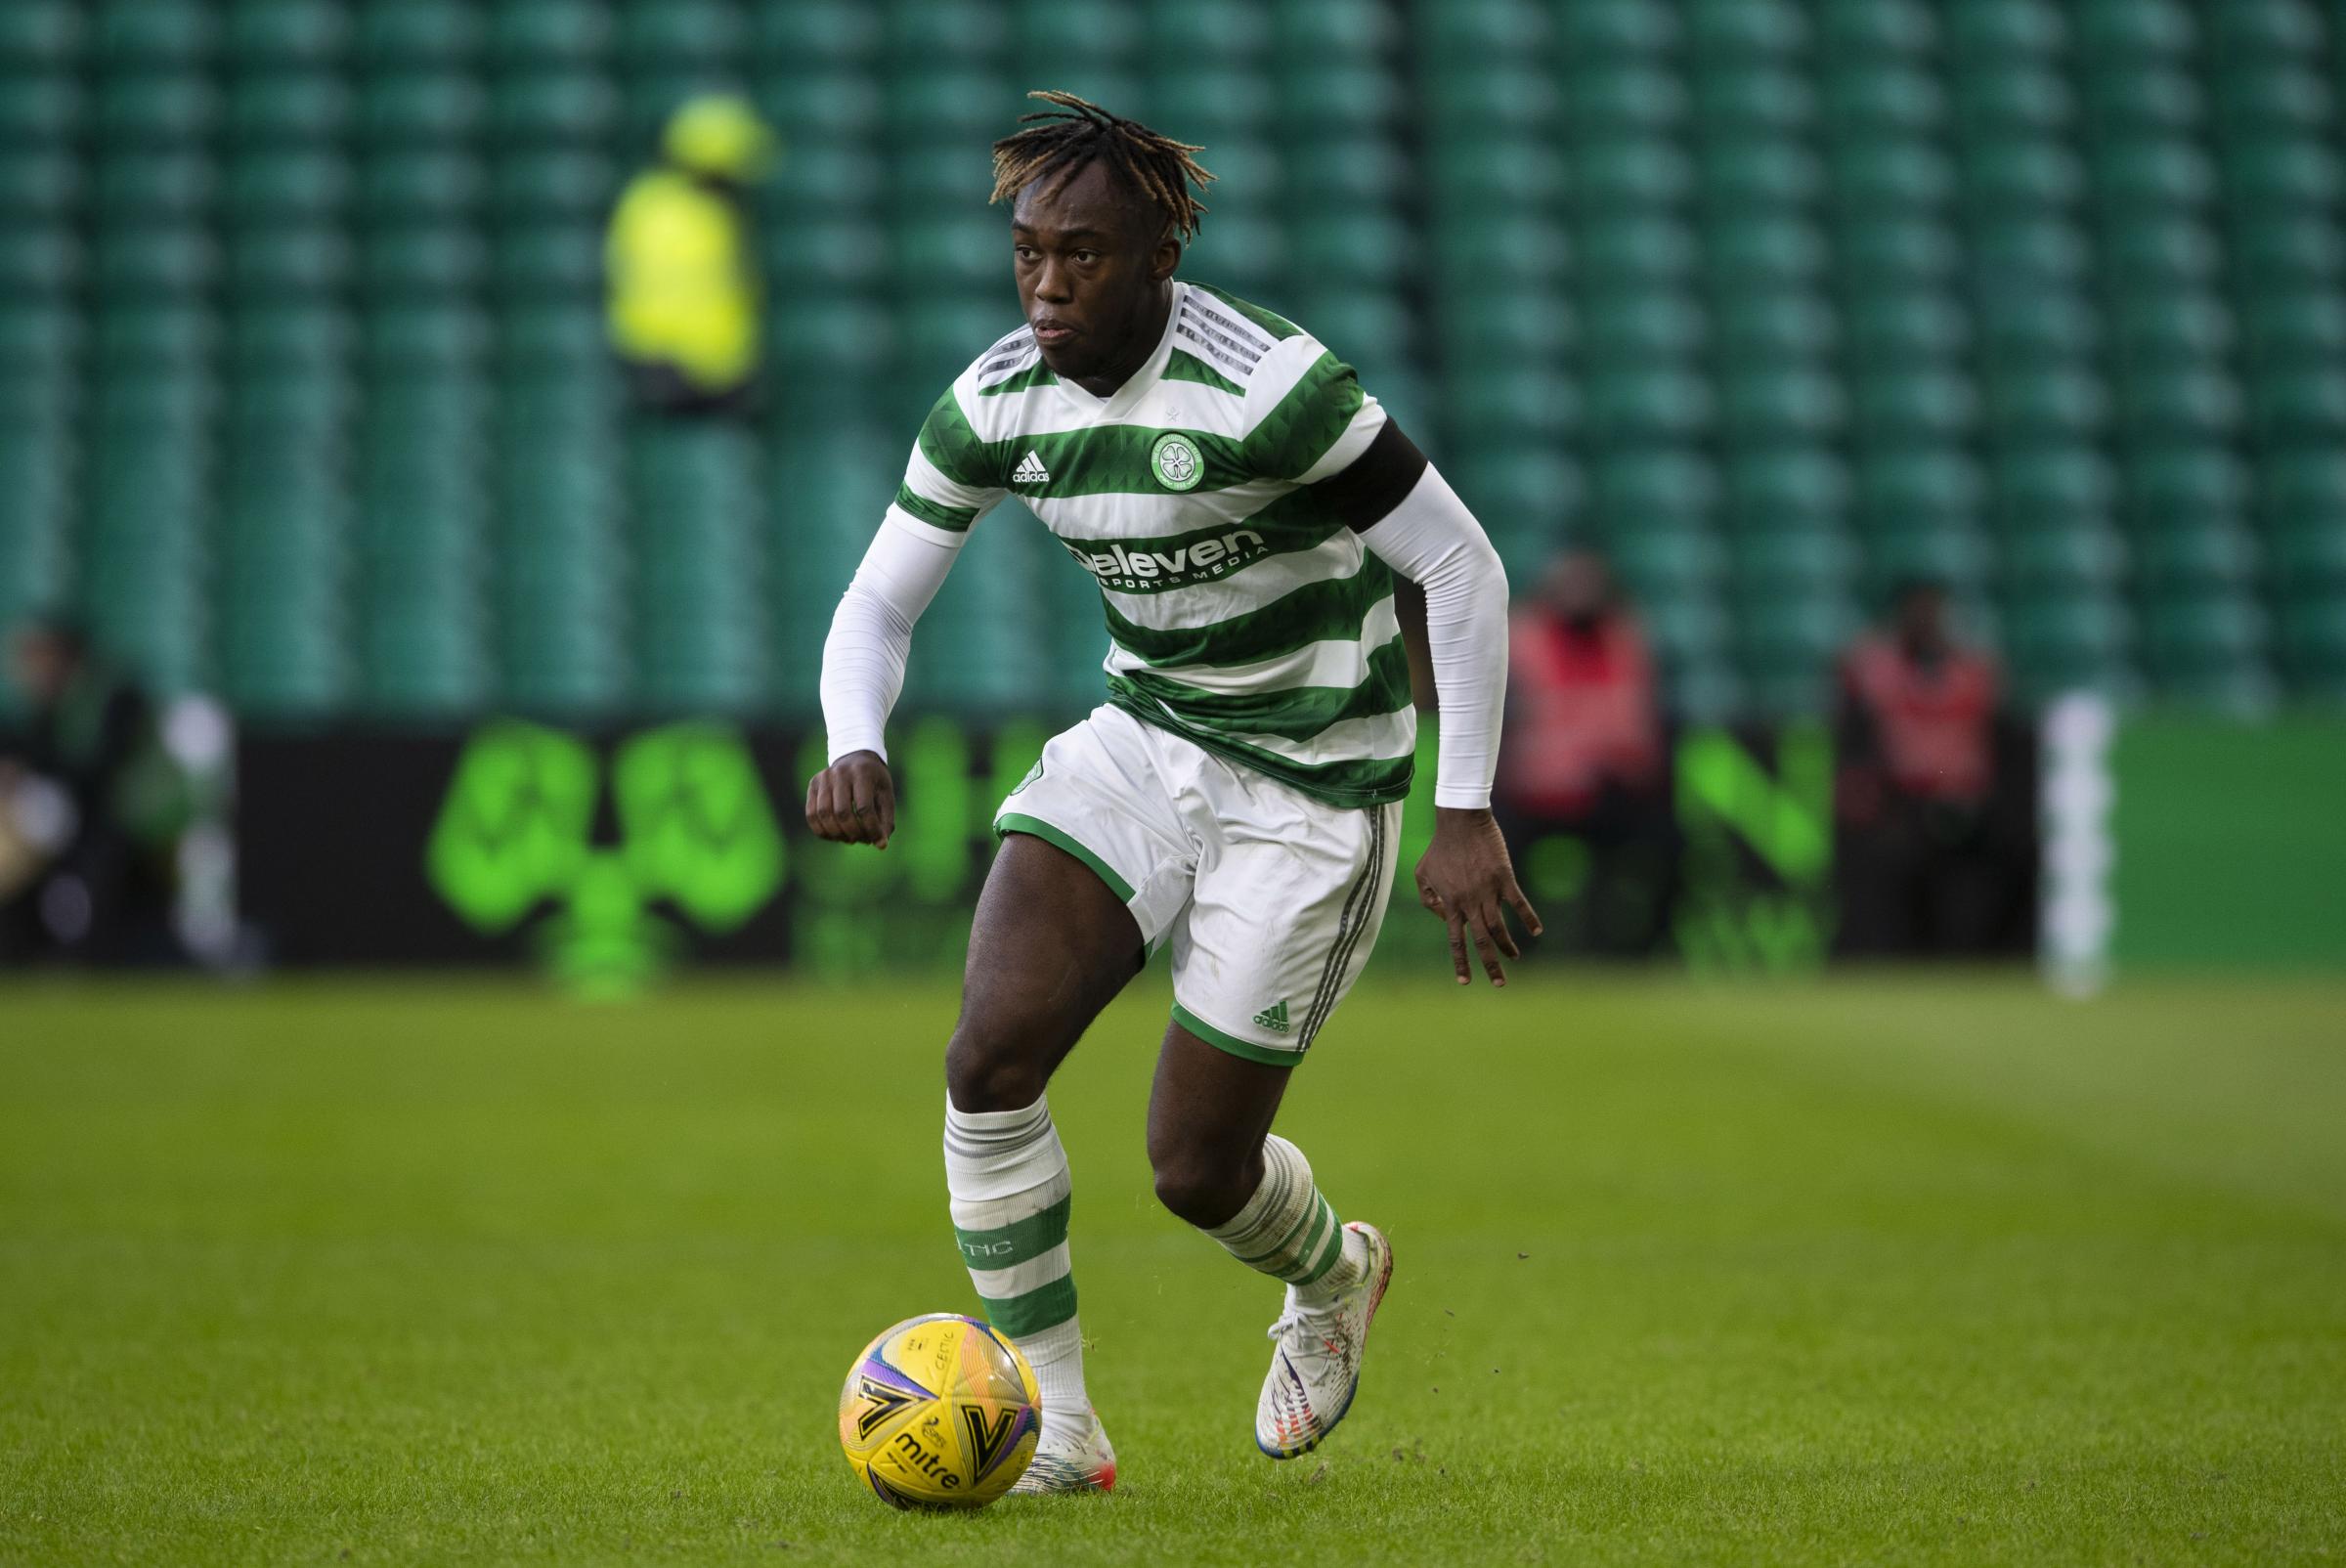 Celtic youngster Ewan Otoo hailed after switching to Dunfermline